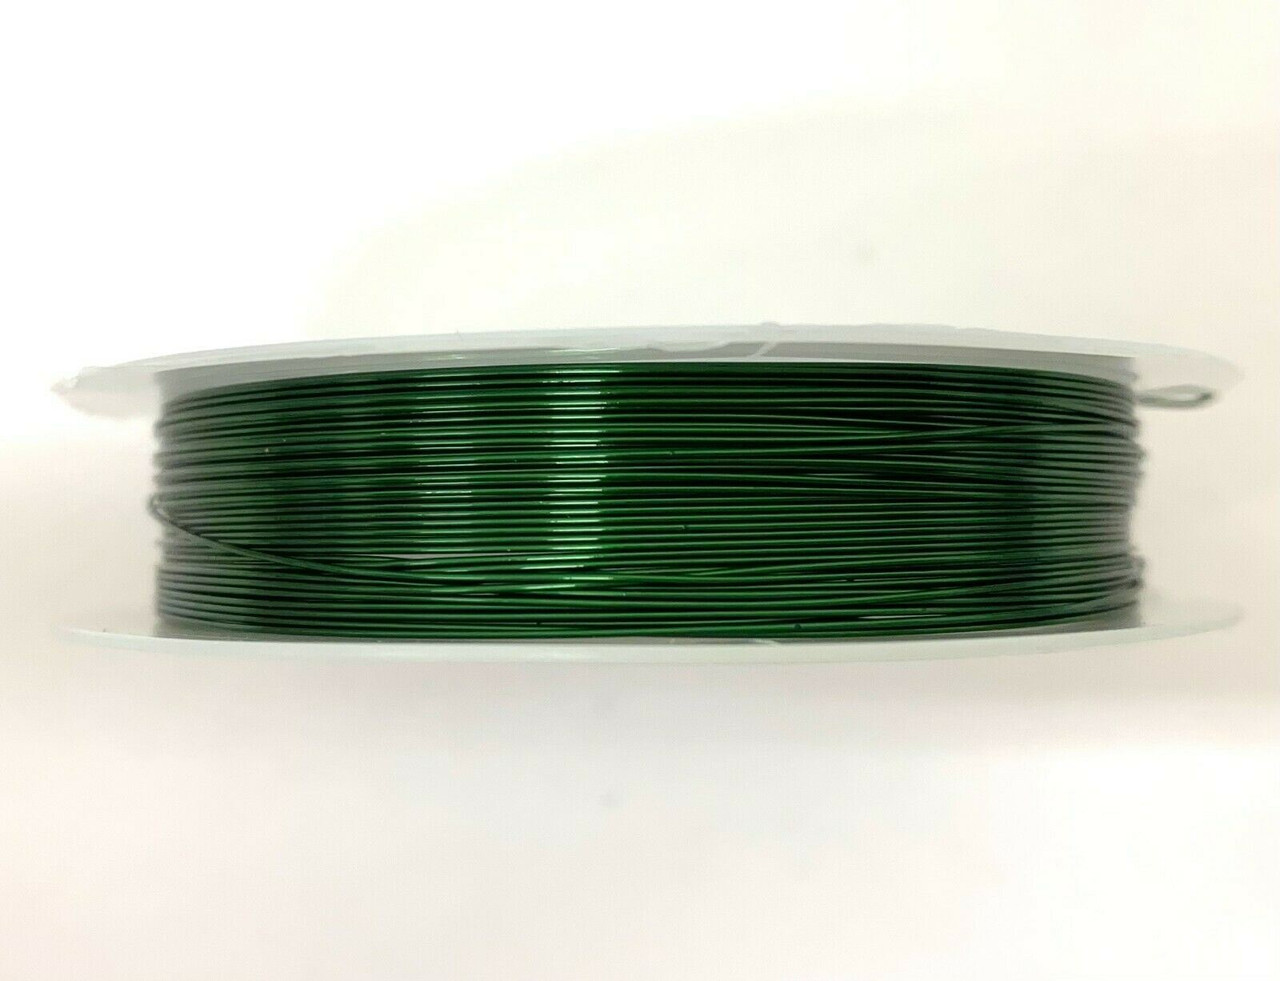 Roll of Copper Wire, 0.6mm thickness, DARK GREEN colour, approx 6m length